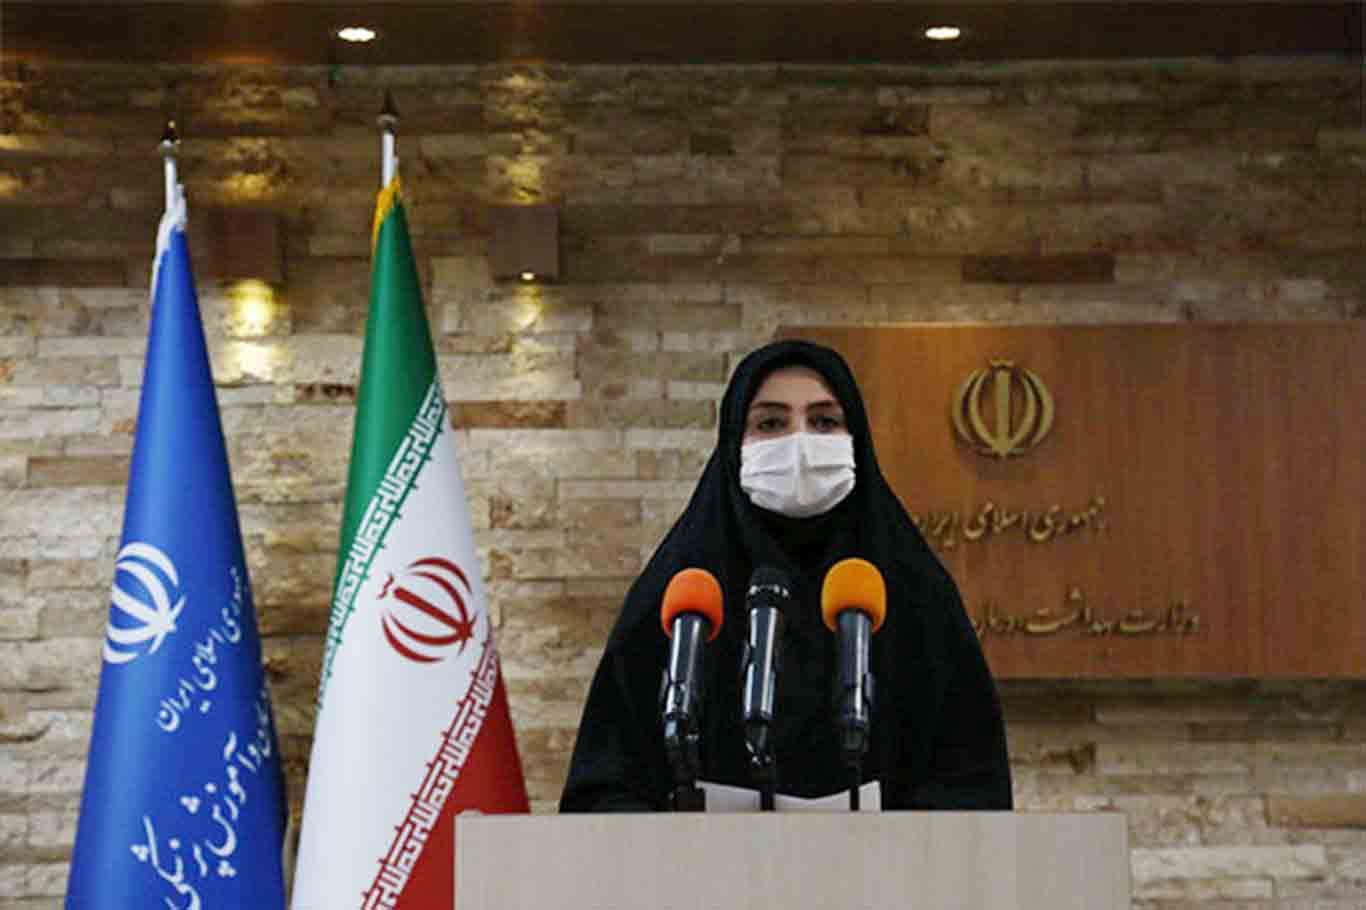 Coronavirus: Iran reports 6,527 new cases, 85 deaths in the last 24 hours